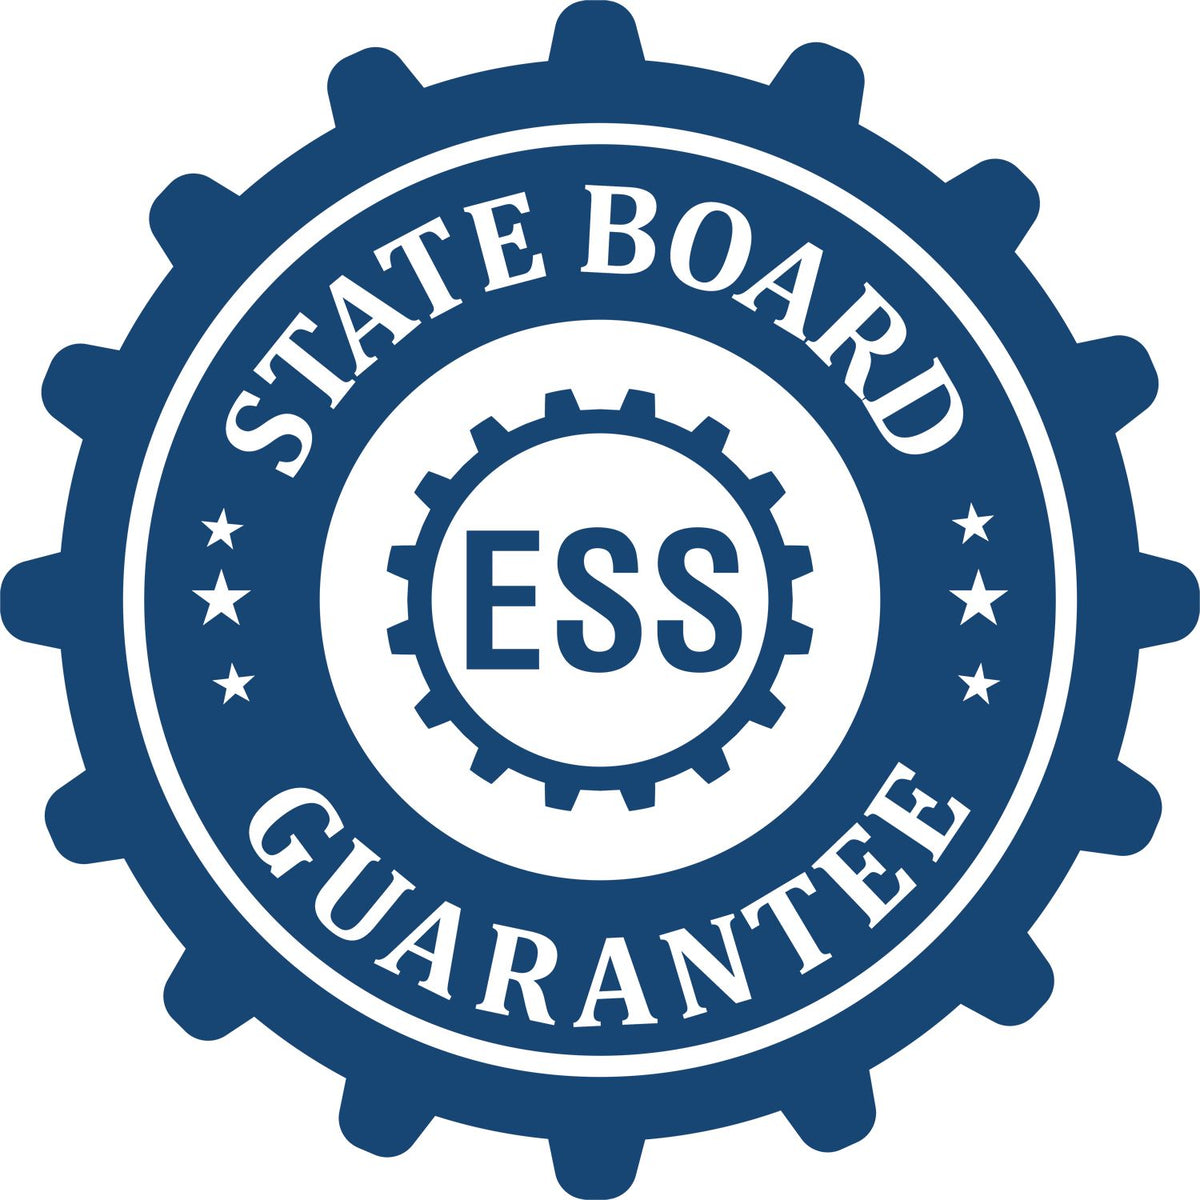 An emblem in a gear shape illustrating a state board guarantee for the State of Wyoming Extended Long Reach Engineer Seal product.